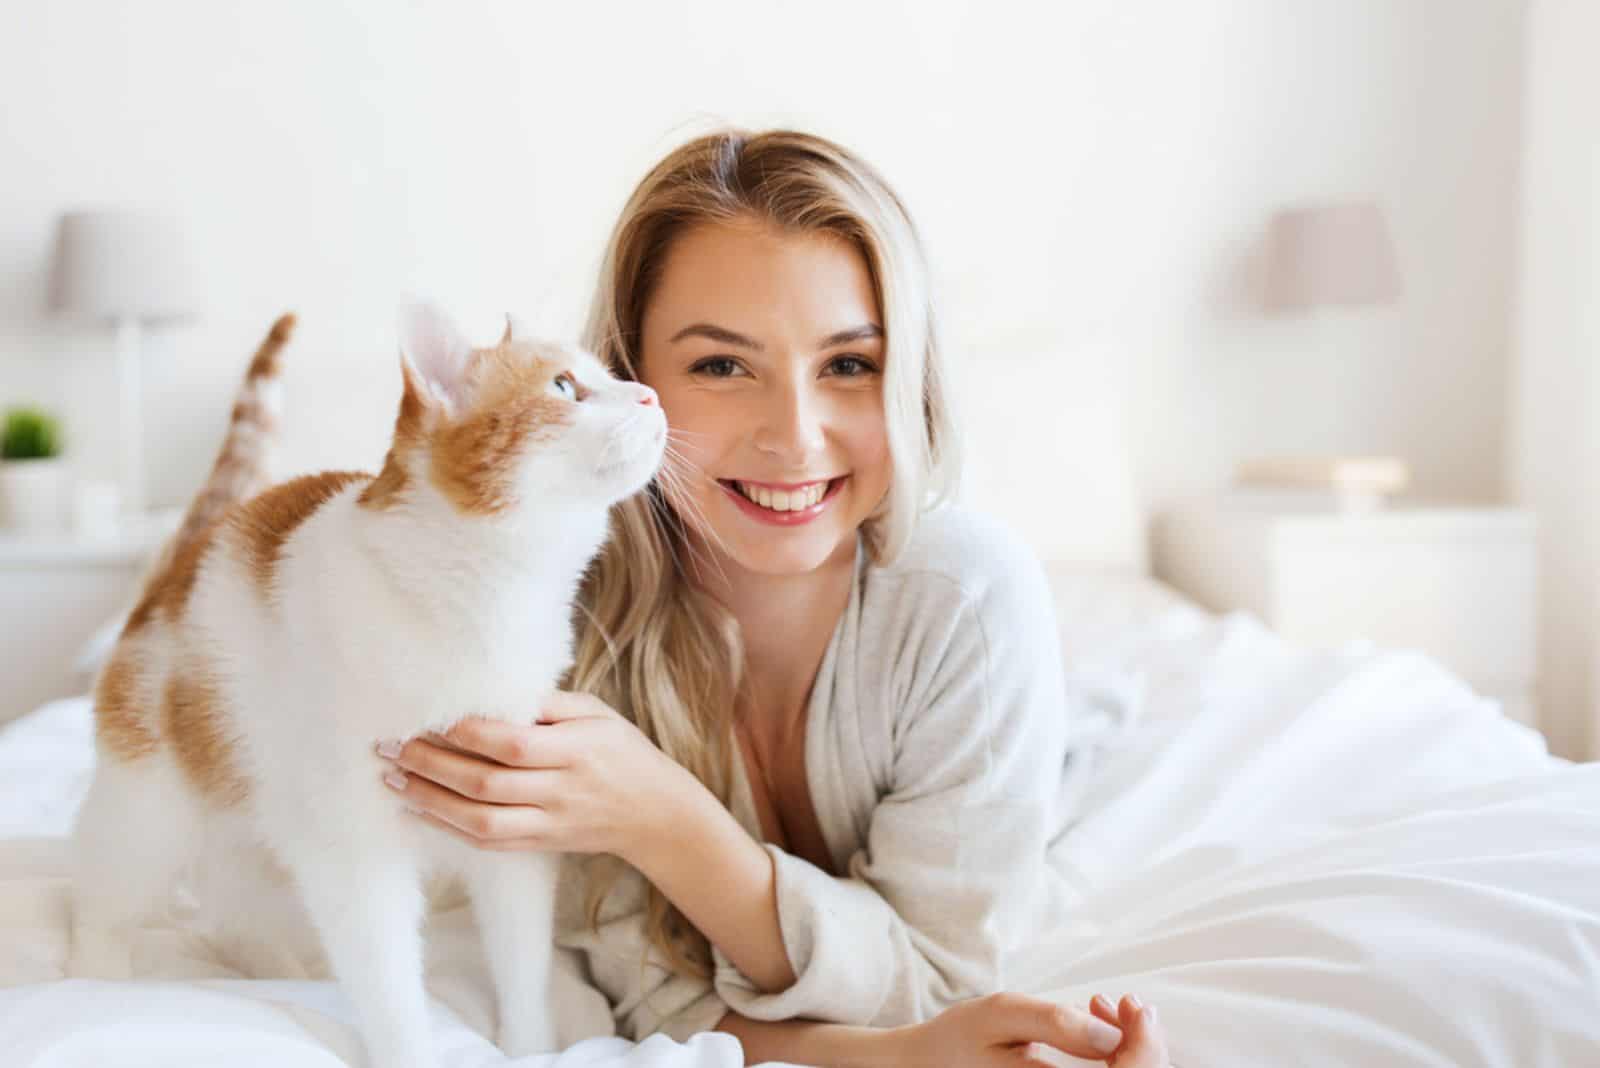  young woman with cat in bed 